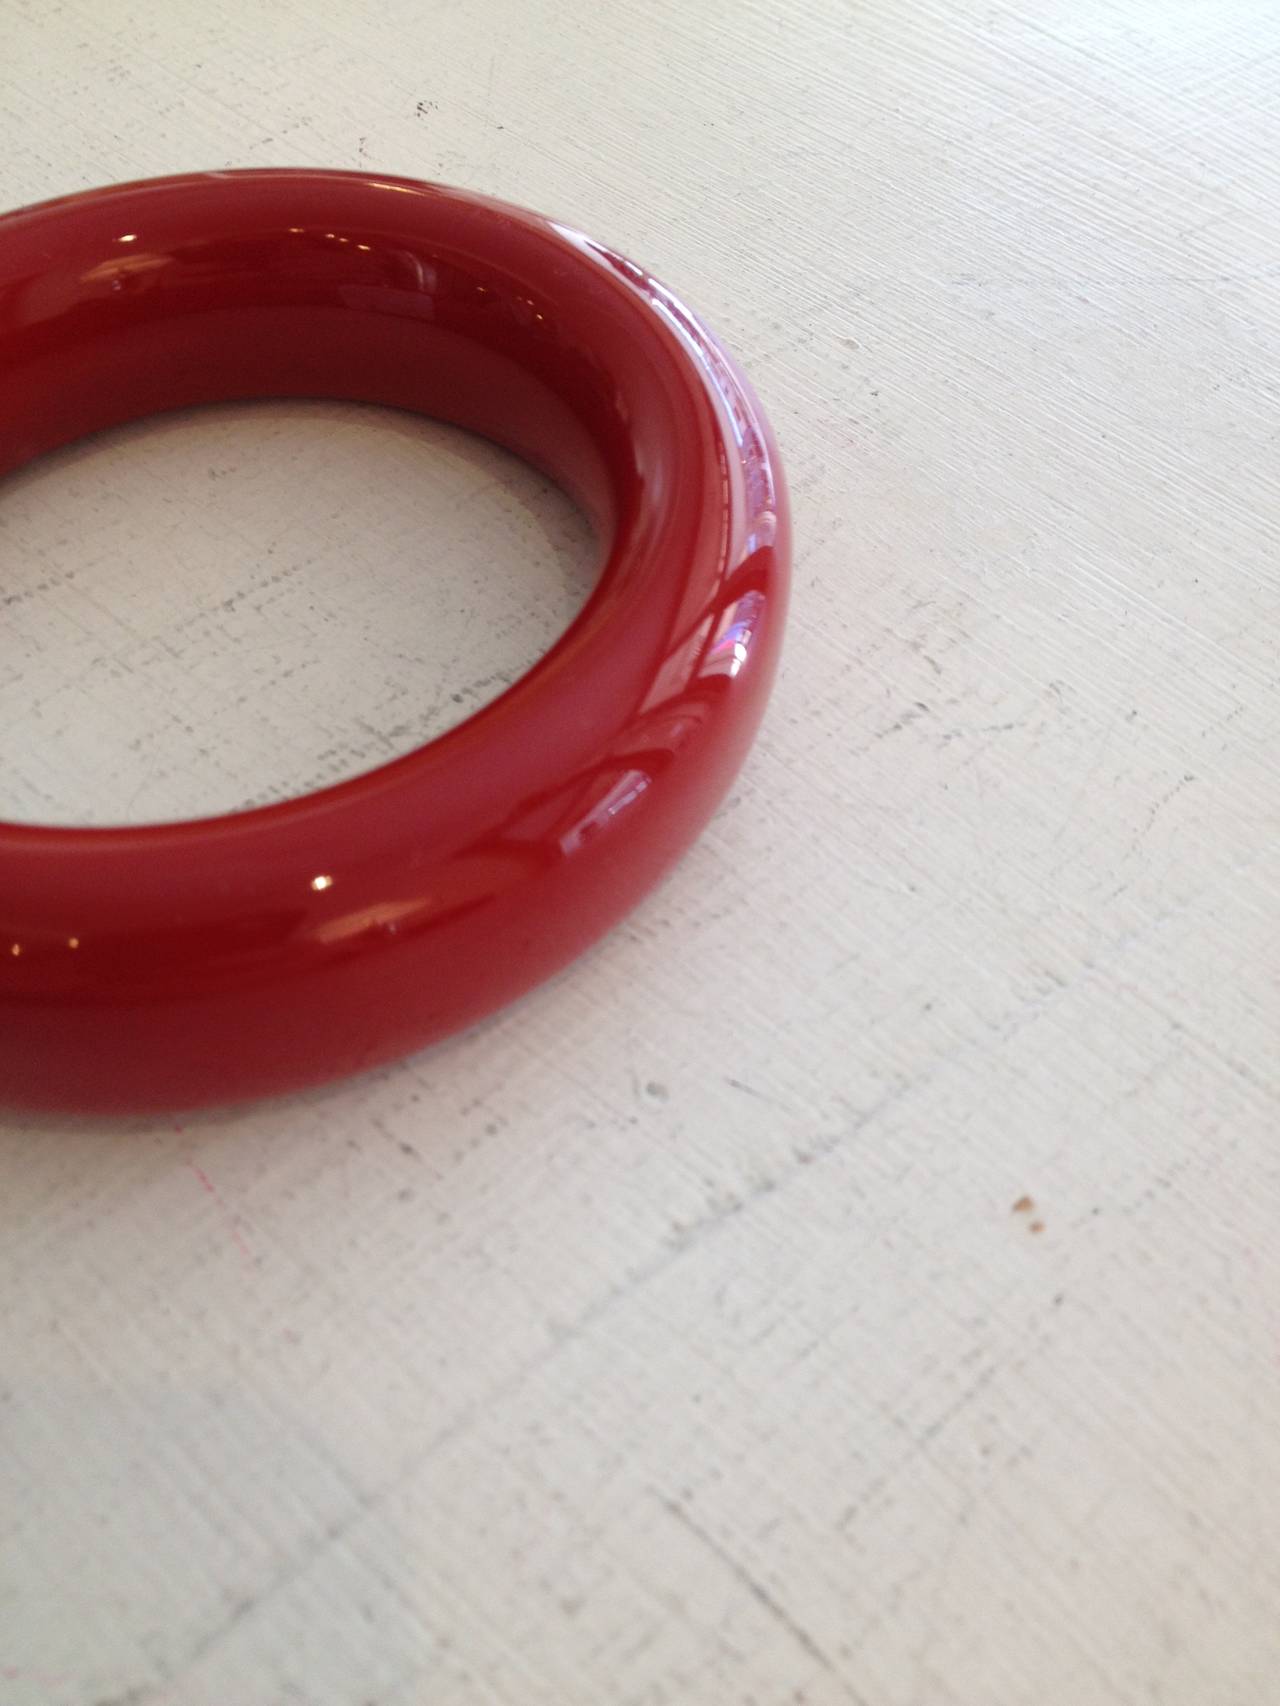 Jewelry designer and model Elsa Peretti uses clean shapes to convey simplicity, graceful design, and modernity. This gorgeous bangle is beautiful in a timeless way - a single smooth-lined ring, made from a deep red material with a glossy, gleaming